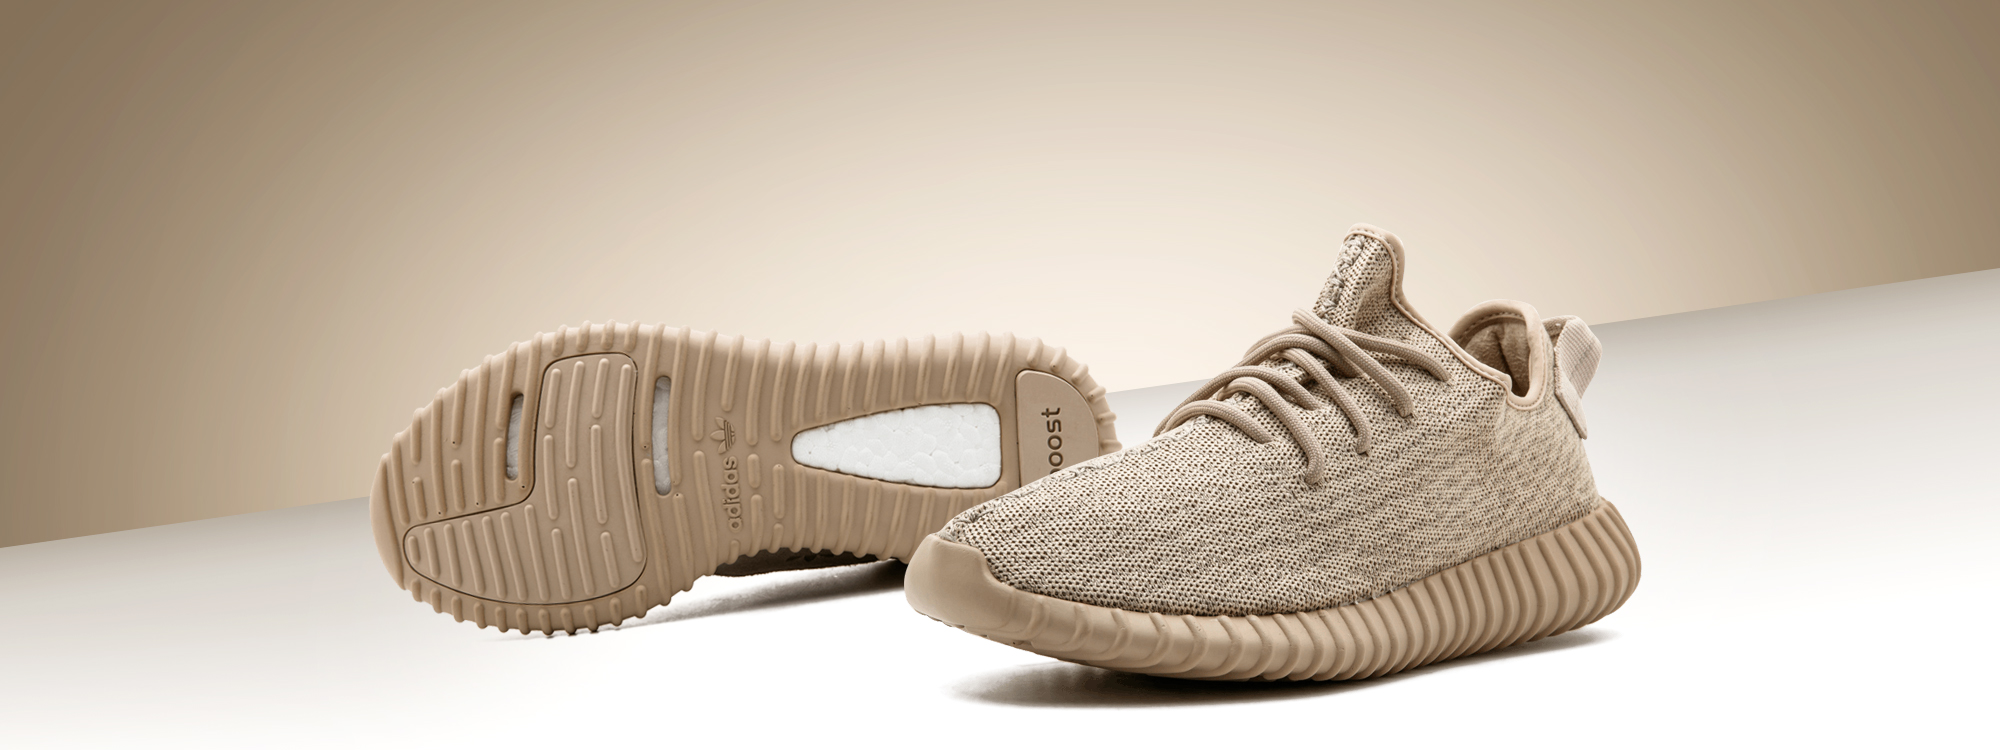 price of new  Yeezy Boost  350 Oxford Tan